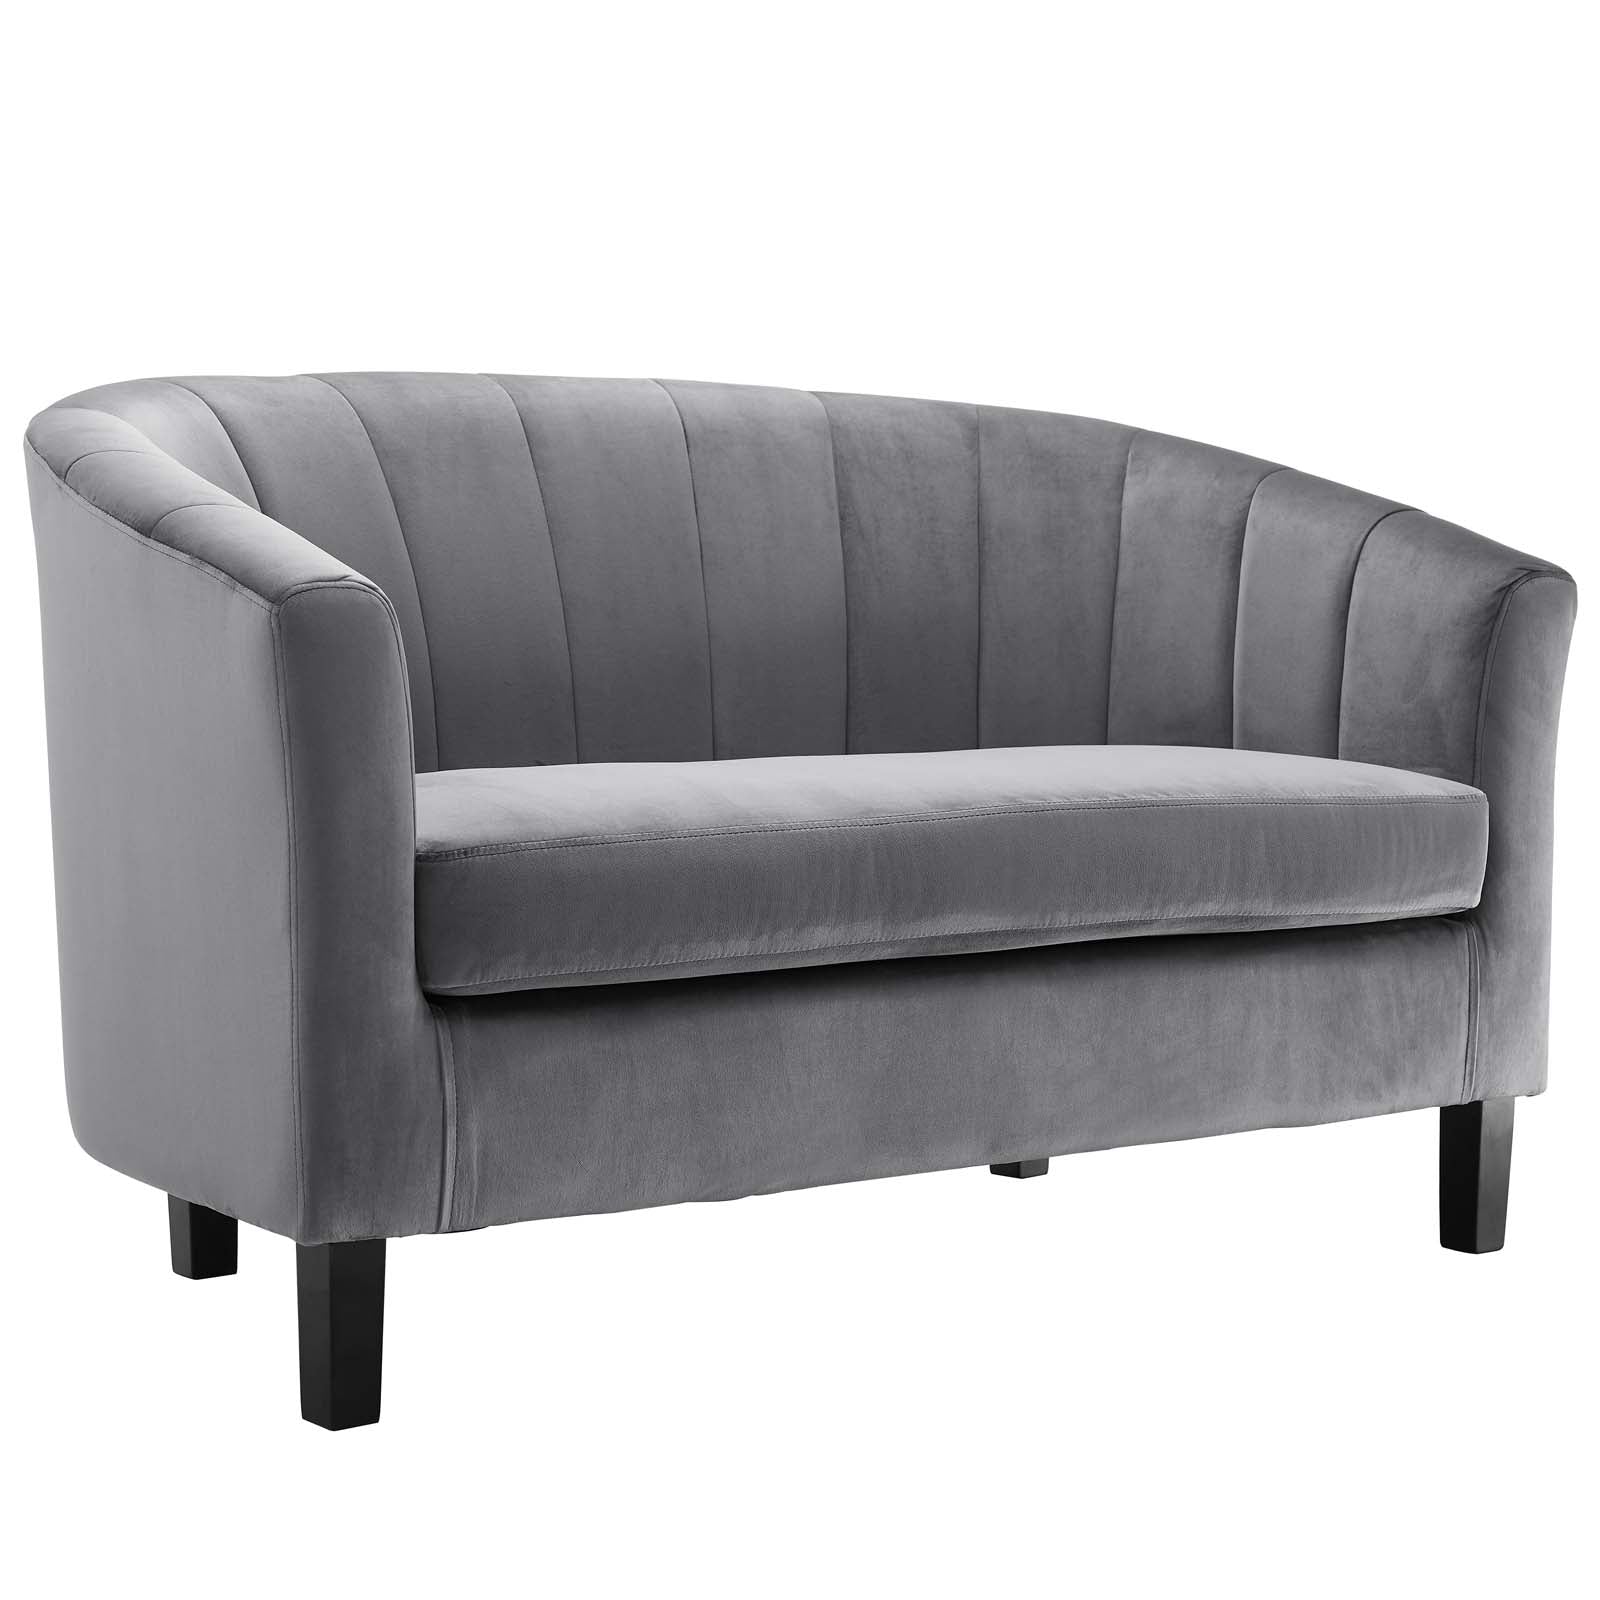 Modway Living Room Sets - Prospect Channel Tufted Performance Velvet Loveseat and Armchair Set Gray